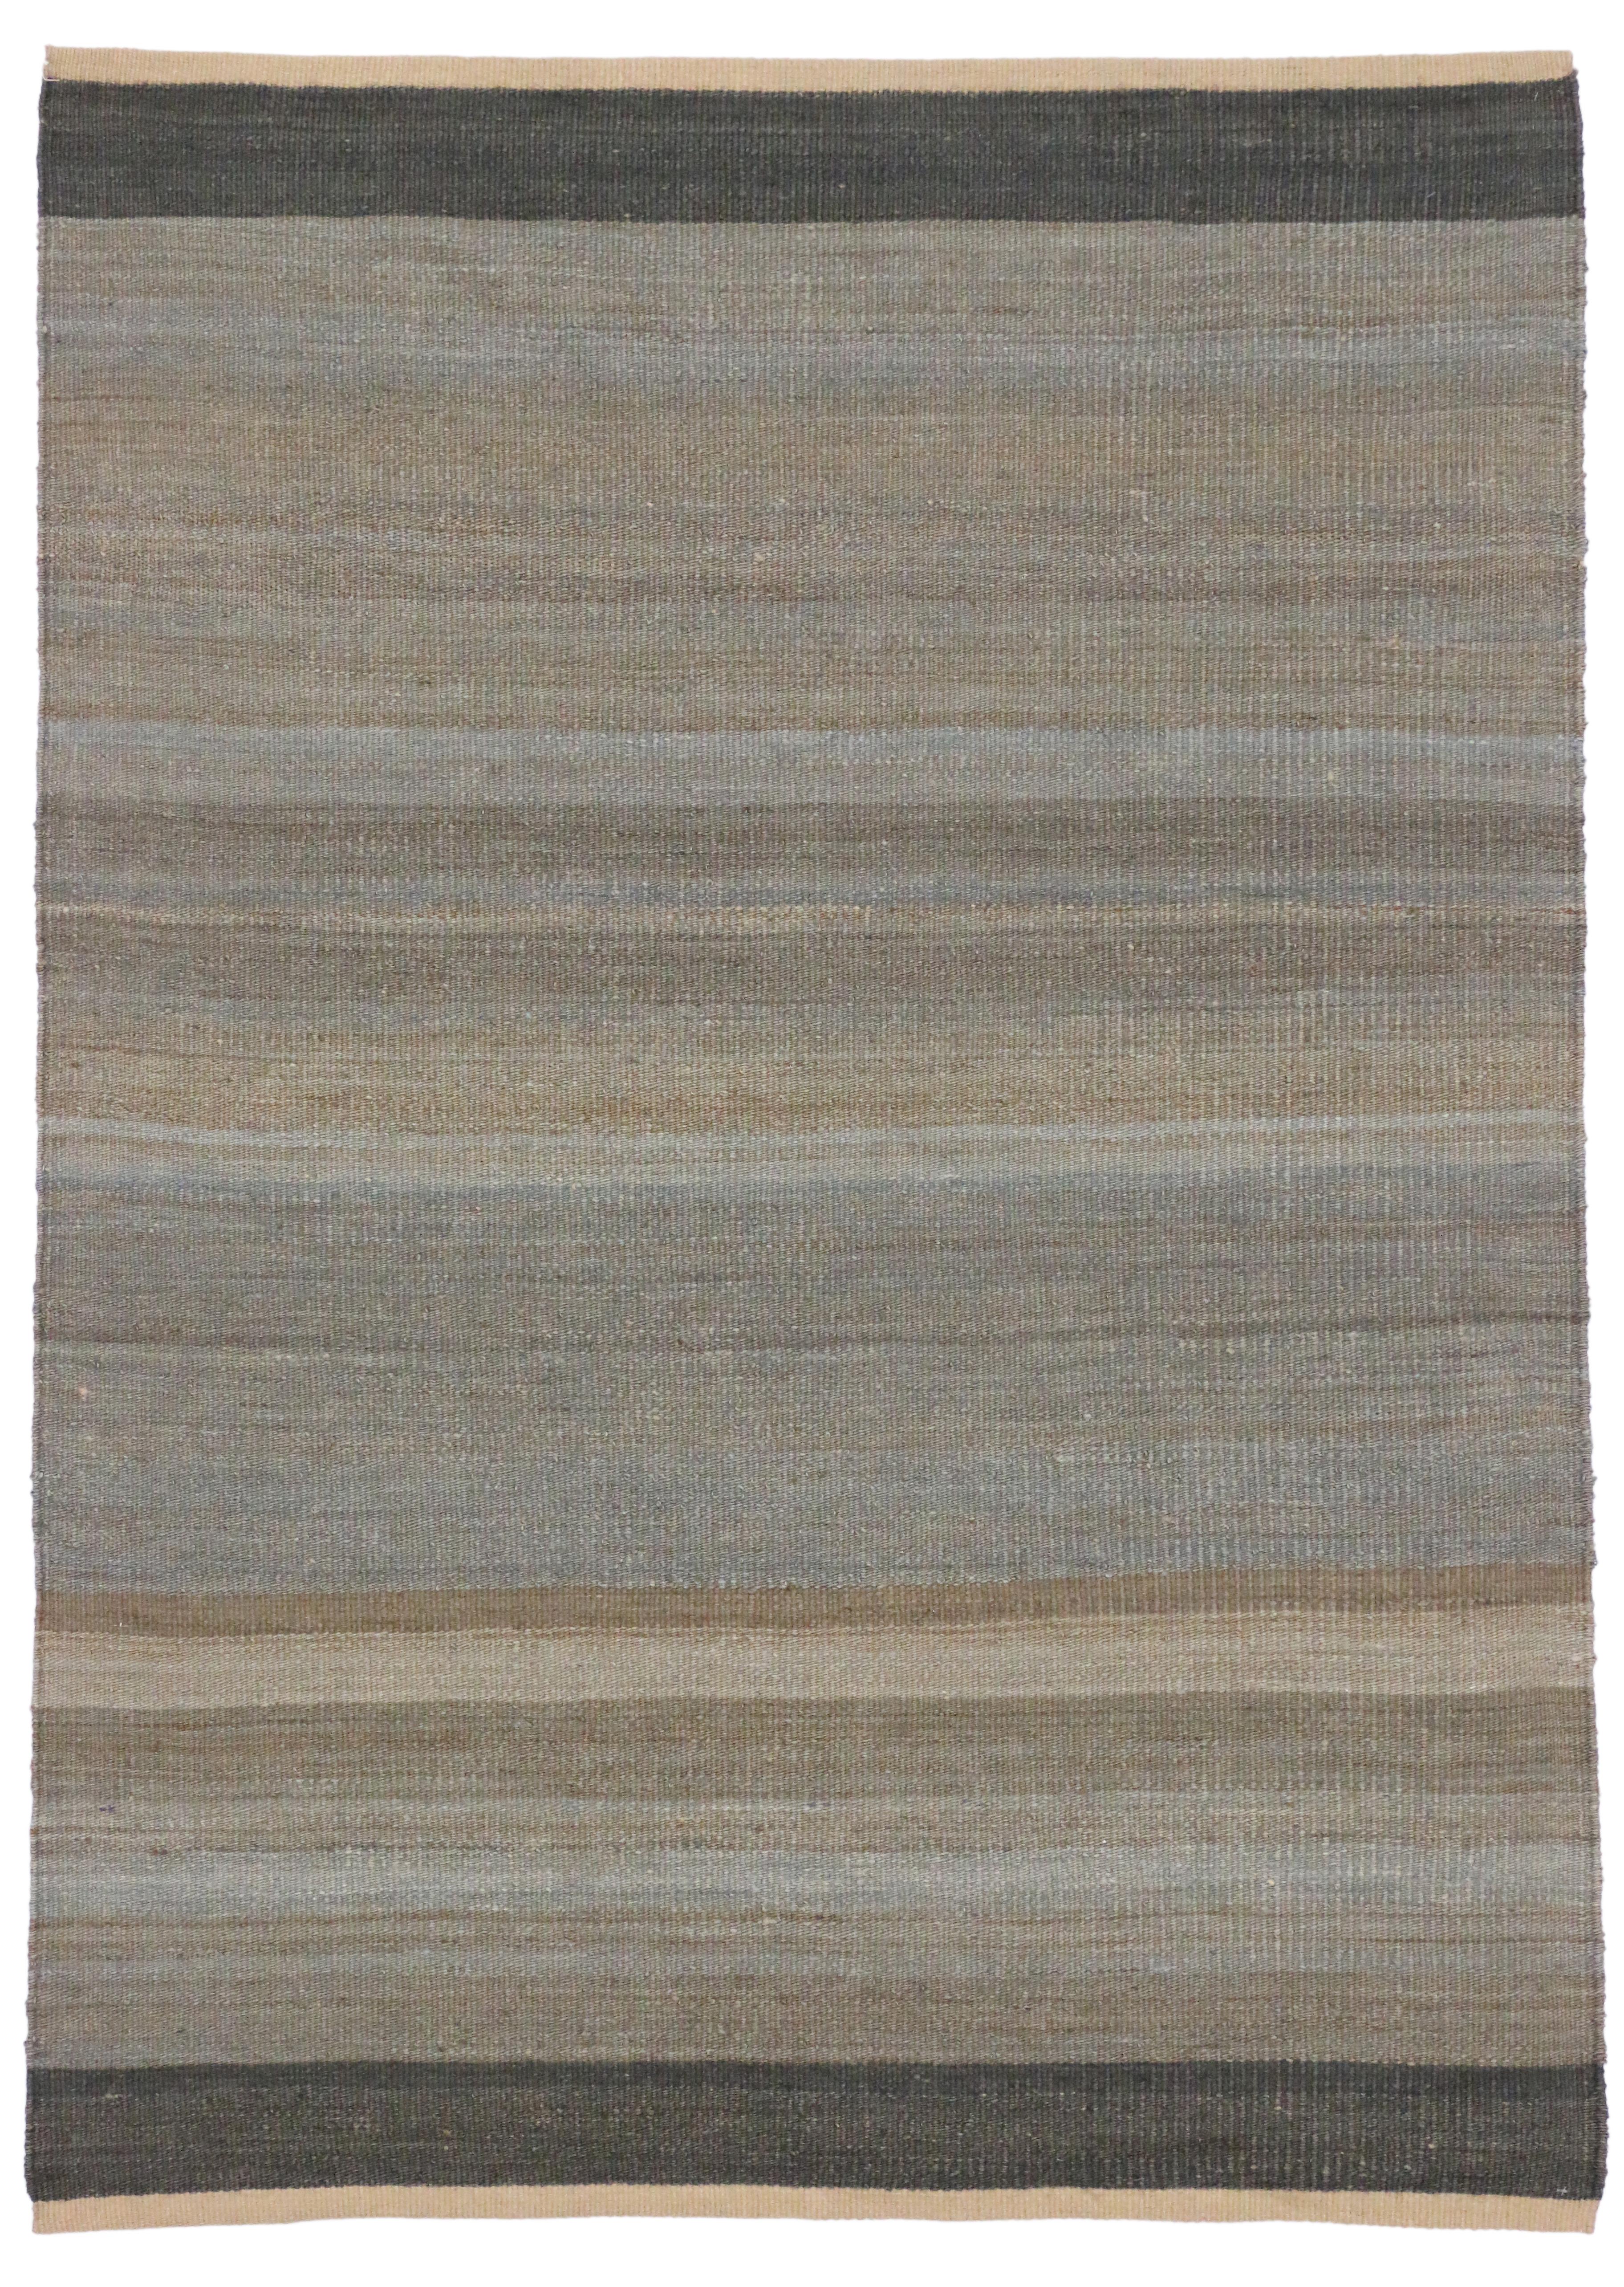 Hand-Woven Modern Lake House Cabin Style Dhurrie, Striped Flat-Weave Rug